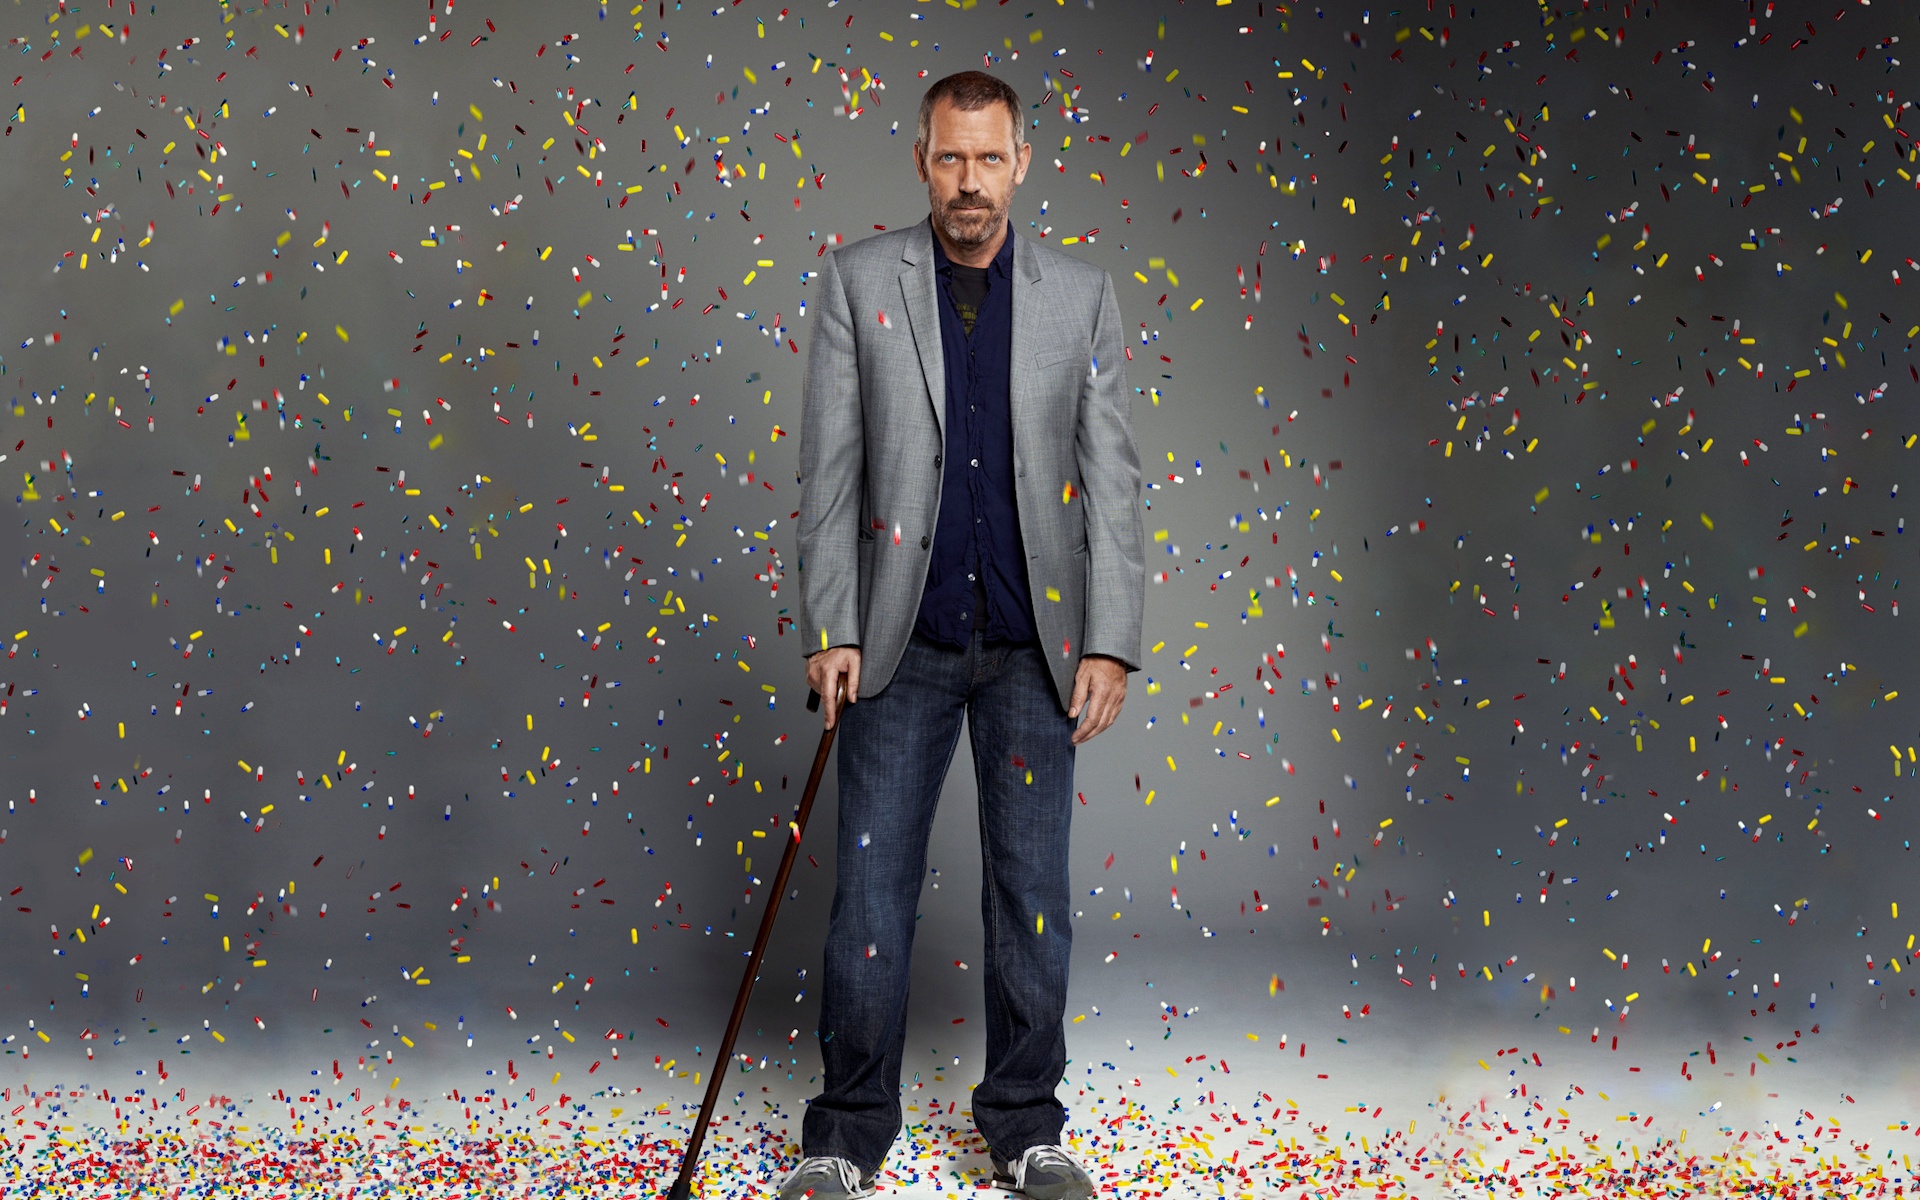 Dr House wallpapers and images   wallpapers pictures photos